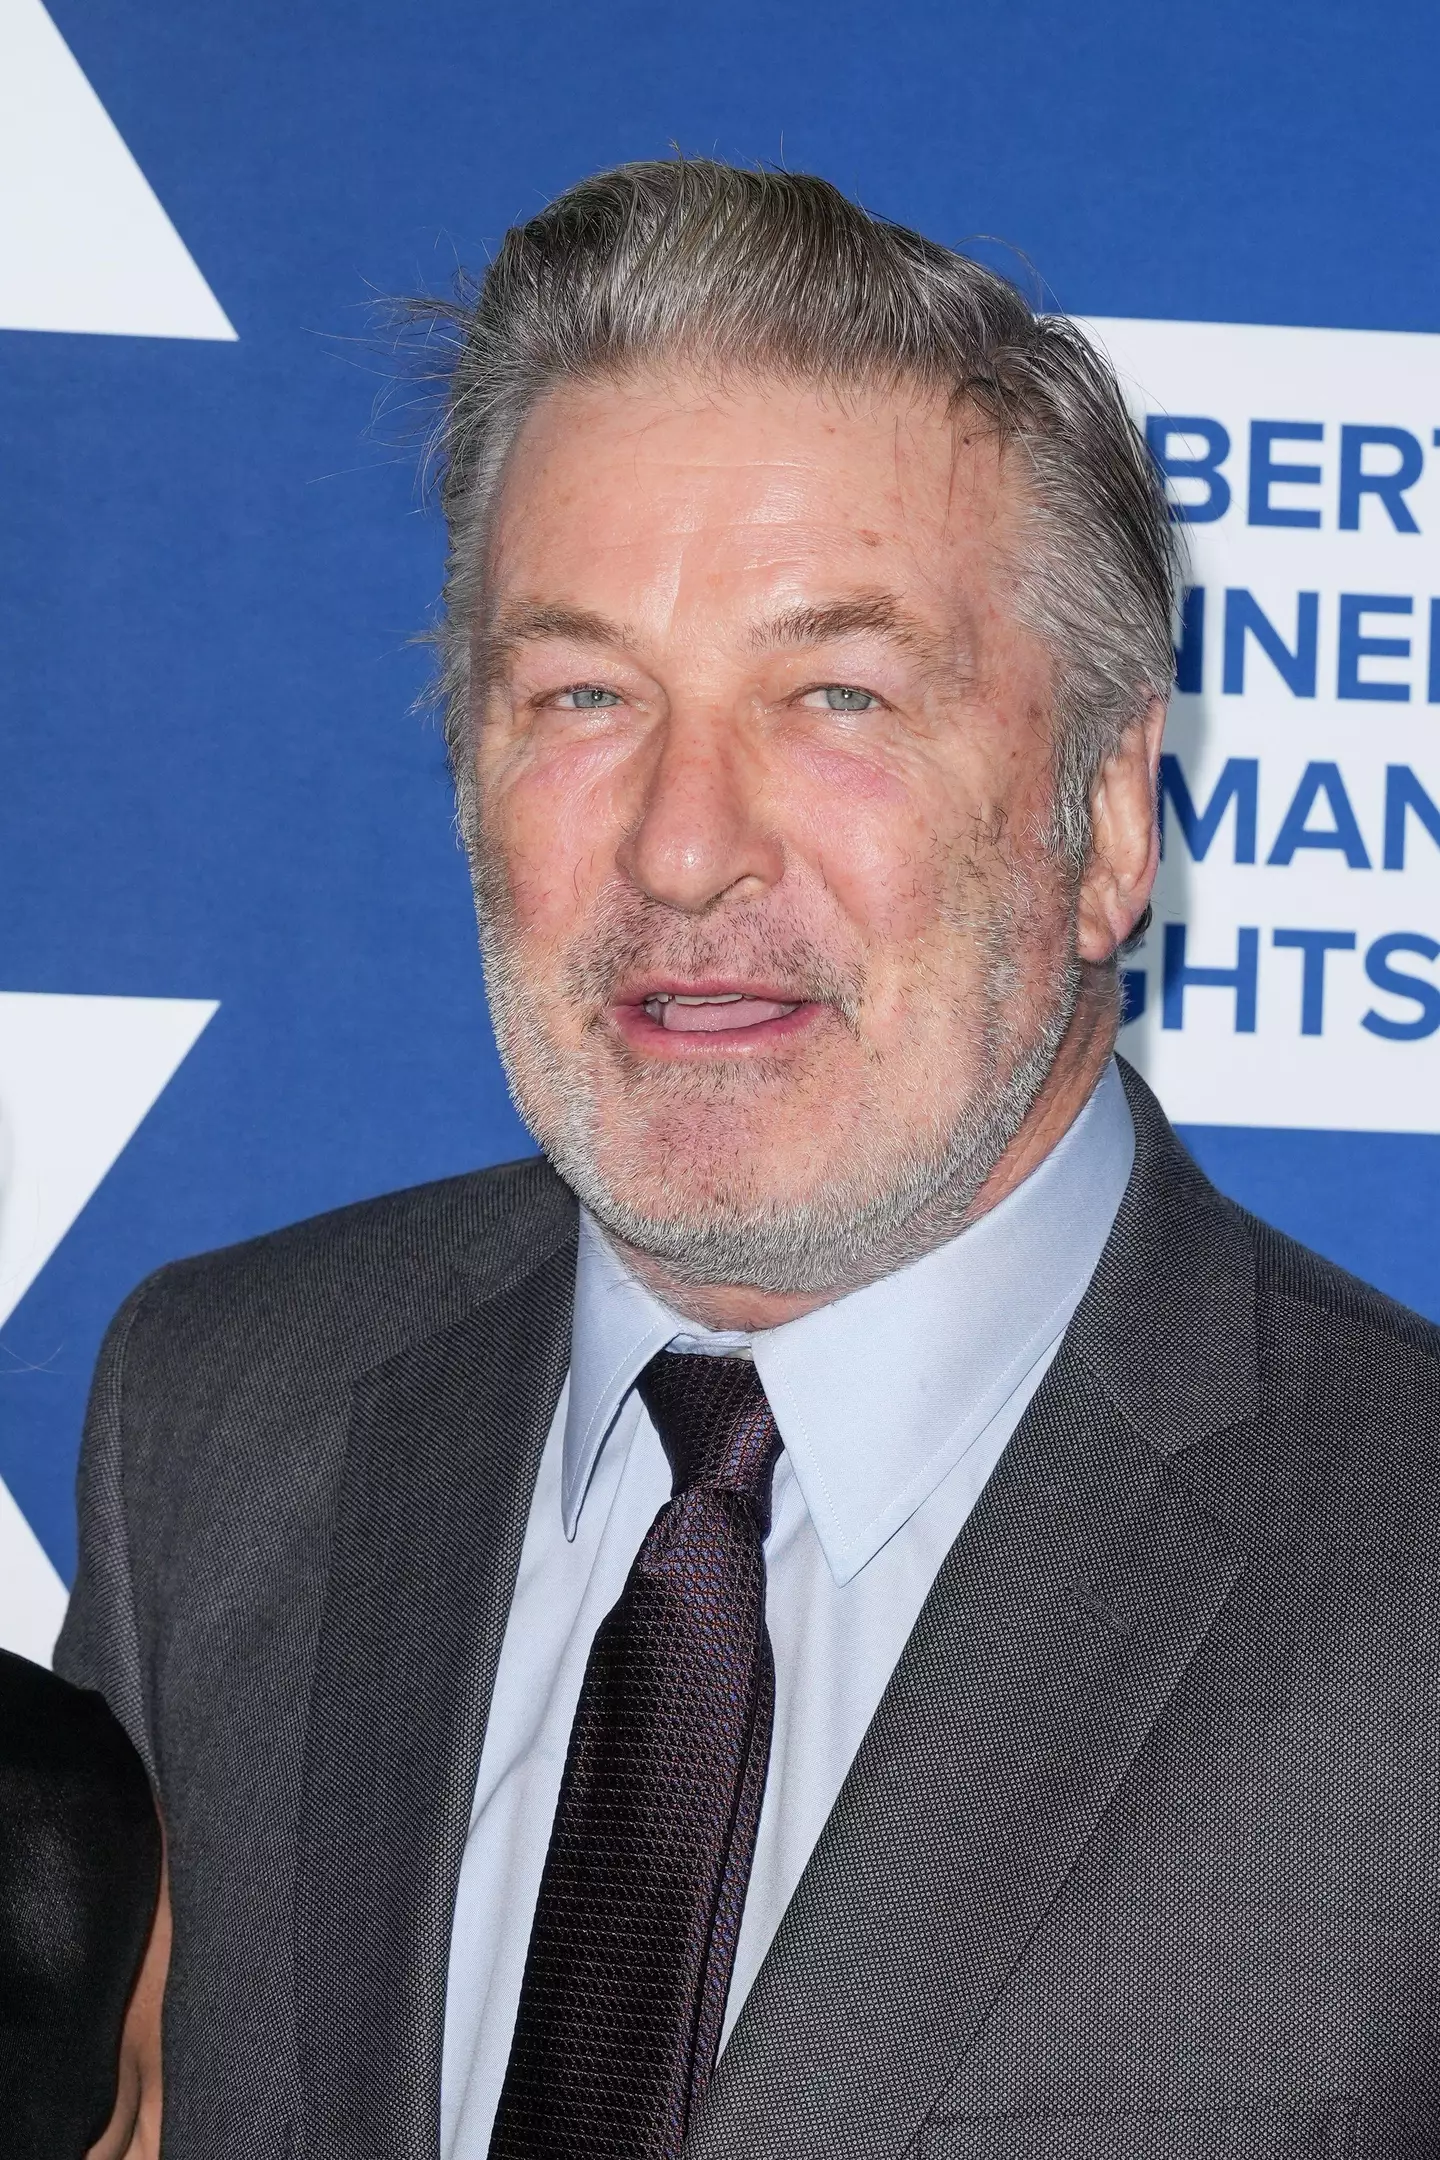 Alec Baldwin could face up to five years in prison.